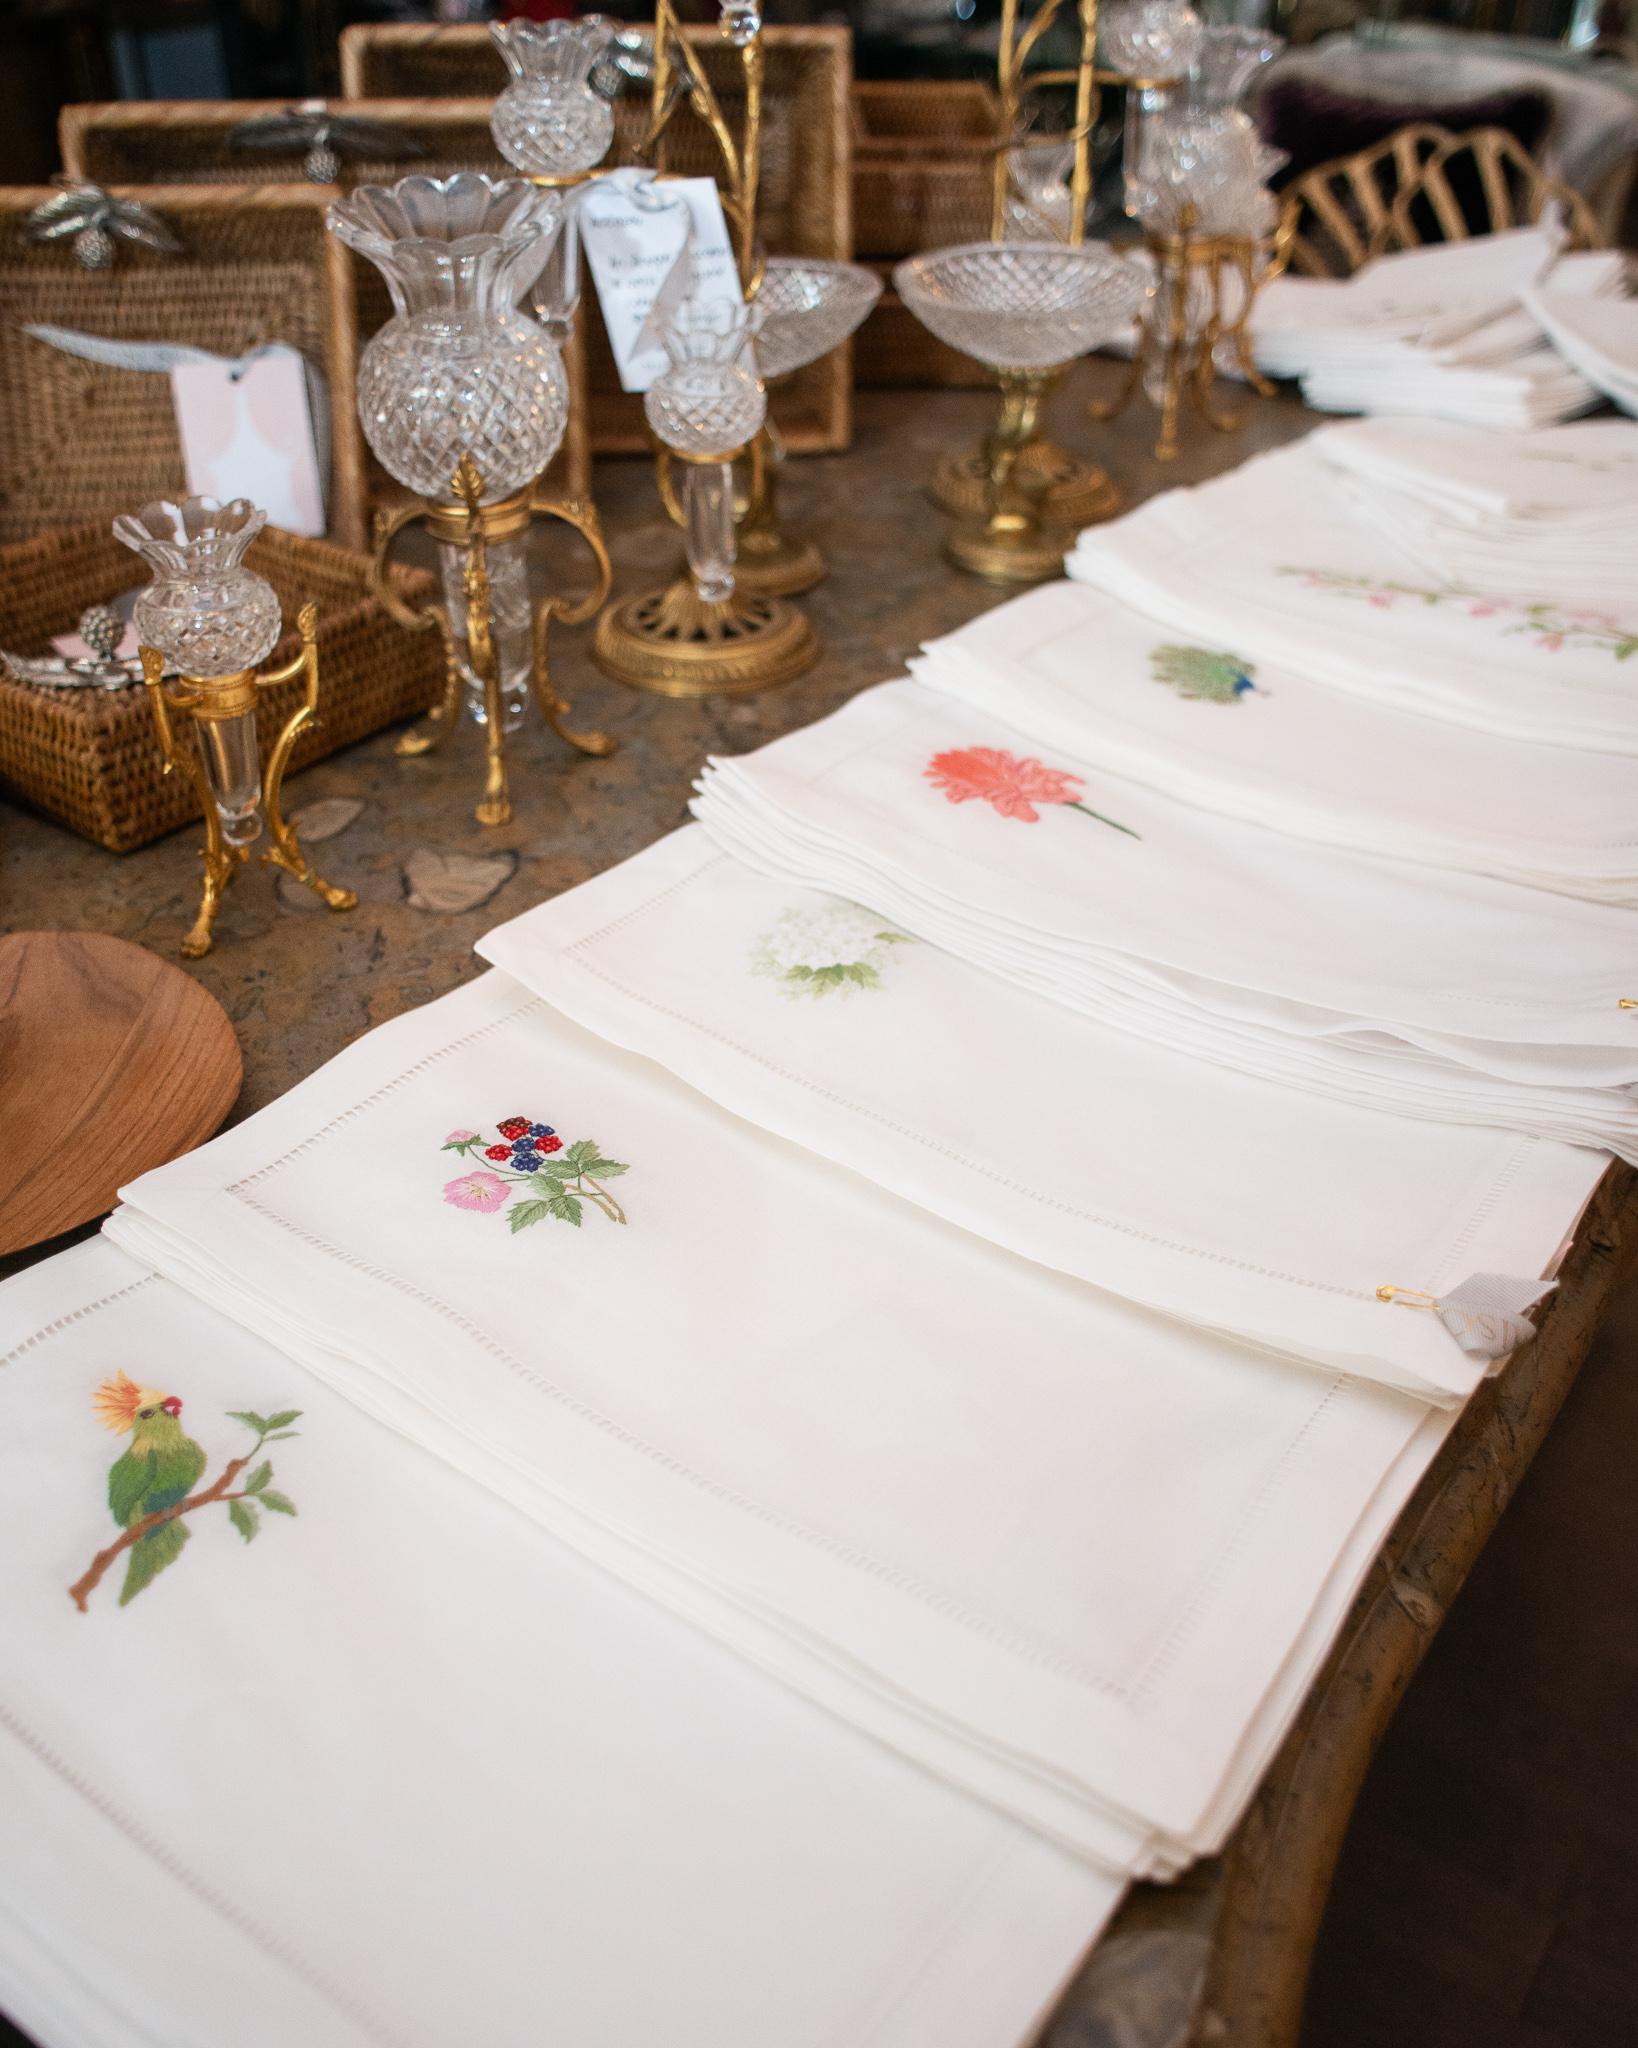 A stunning set of 12 hand embroidered linen placemats, made by hand in Portugal and embroidered with parrots. A unique blend of timeless European inspiration and Classic design expressed in the finest materials and finishes. Operating since 1938,